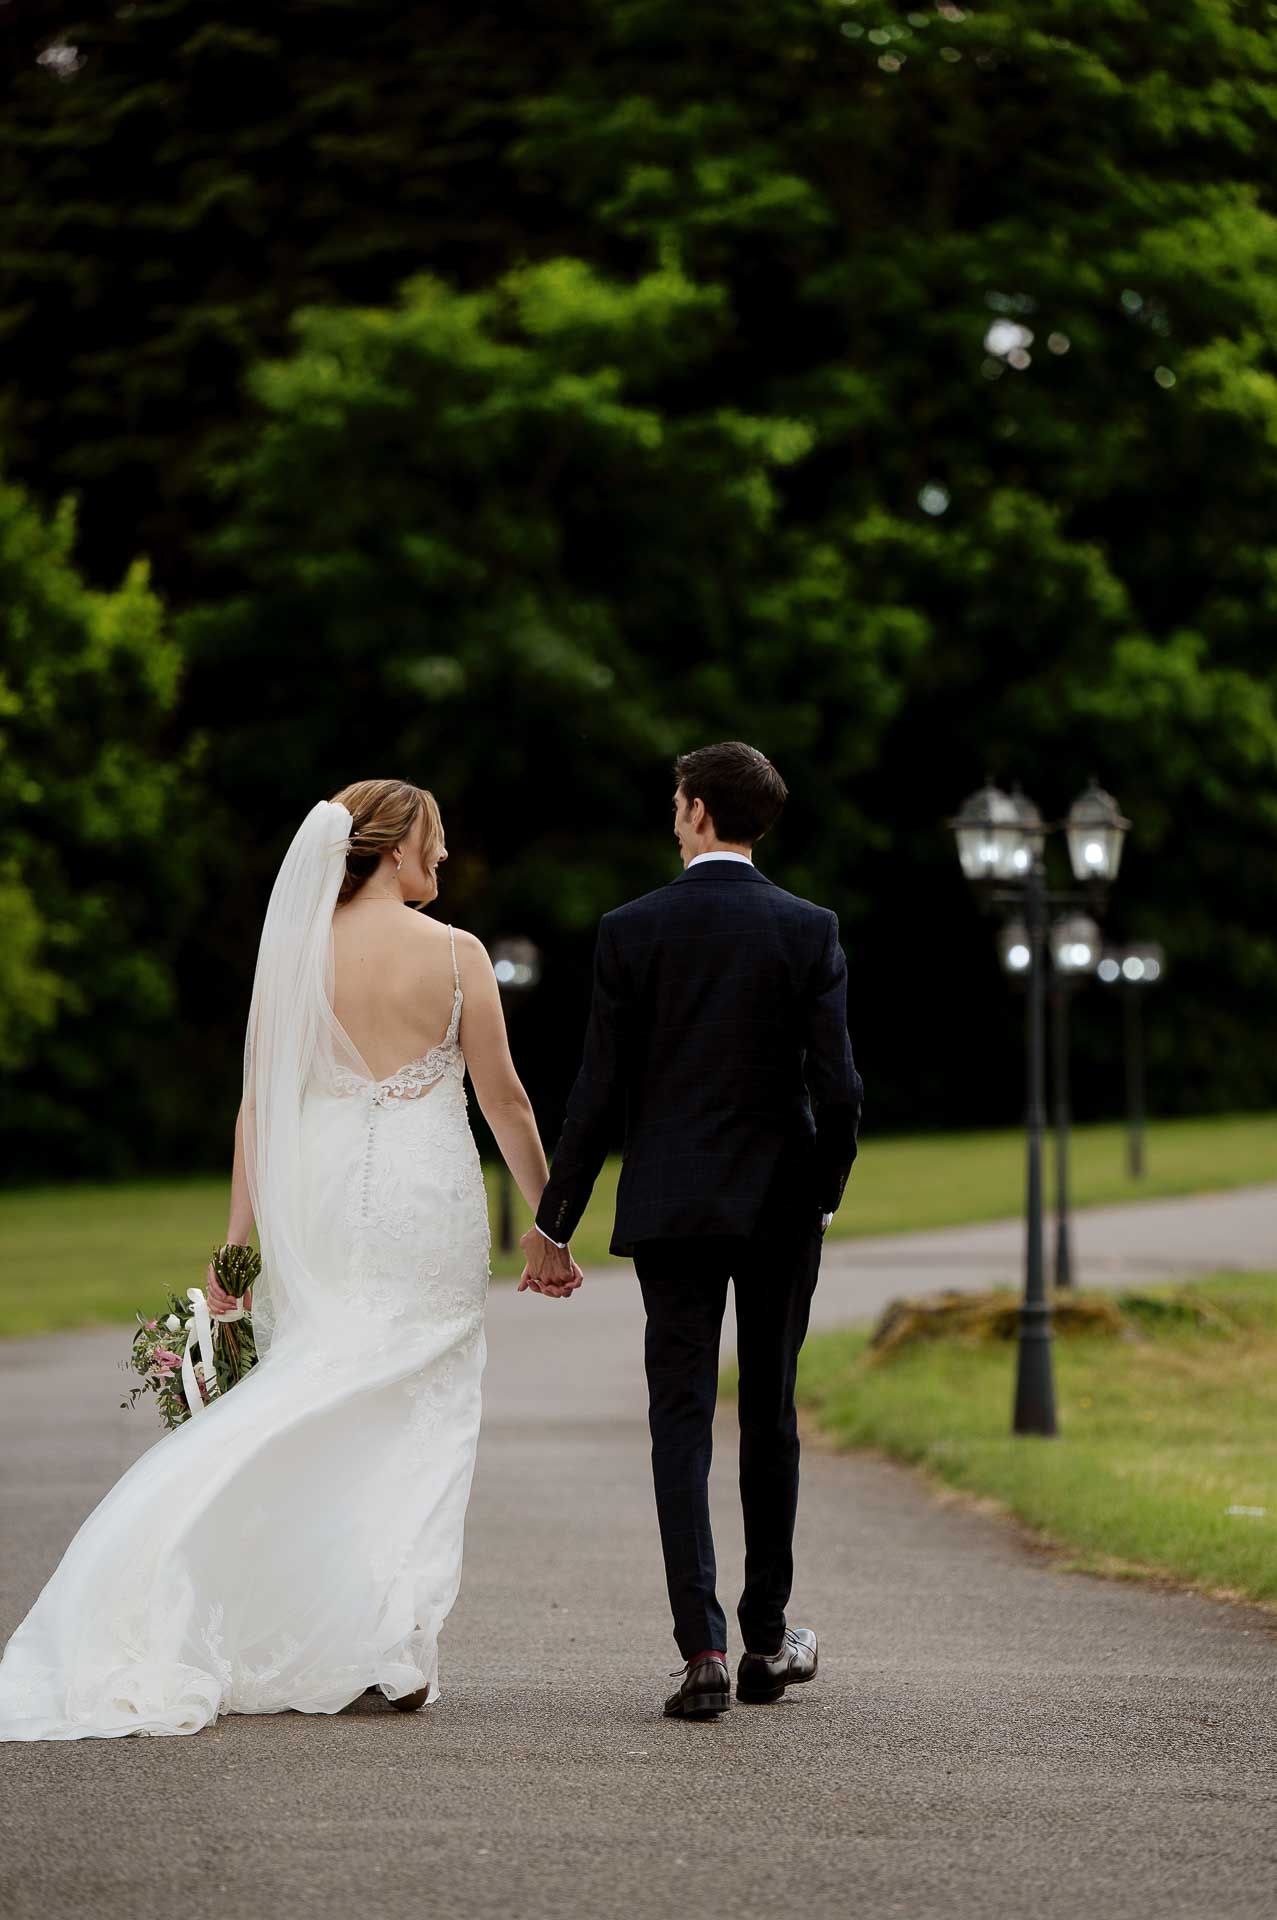 Sophie and Ross holding hands walking away from the camera down the driveway at Swynford Manor. Photography by Fountain Photography. Videography by Veiled Productions.